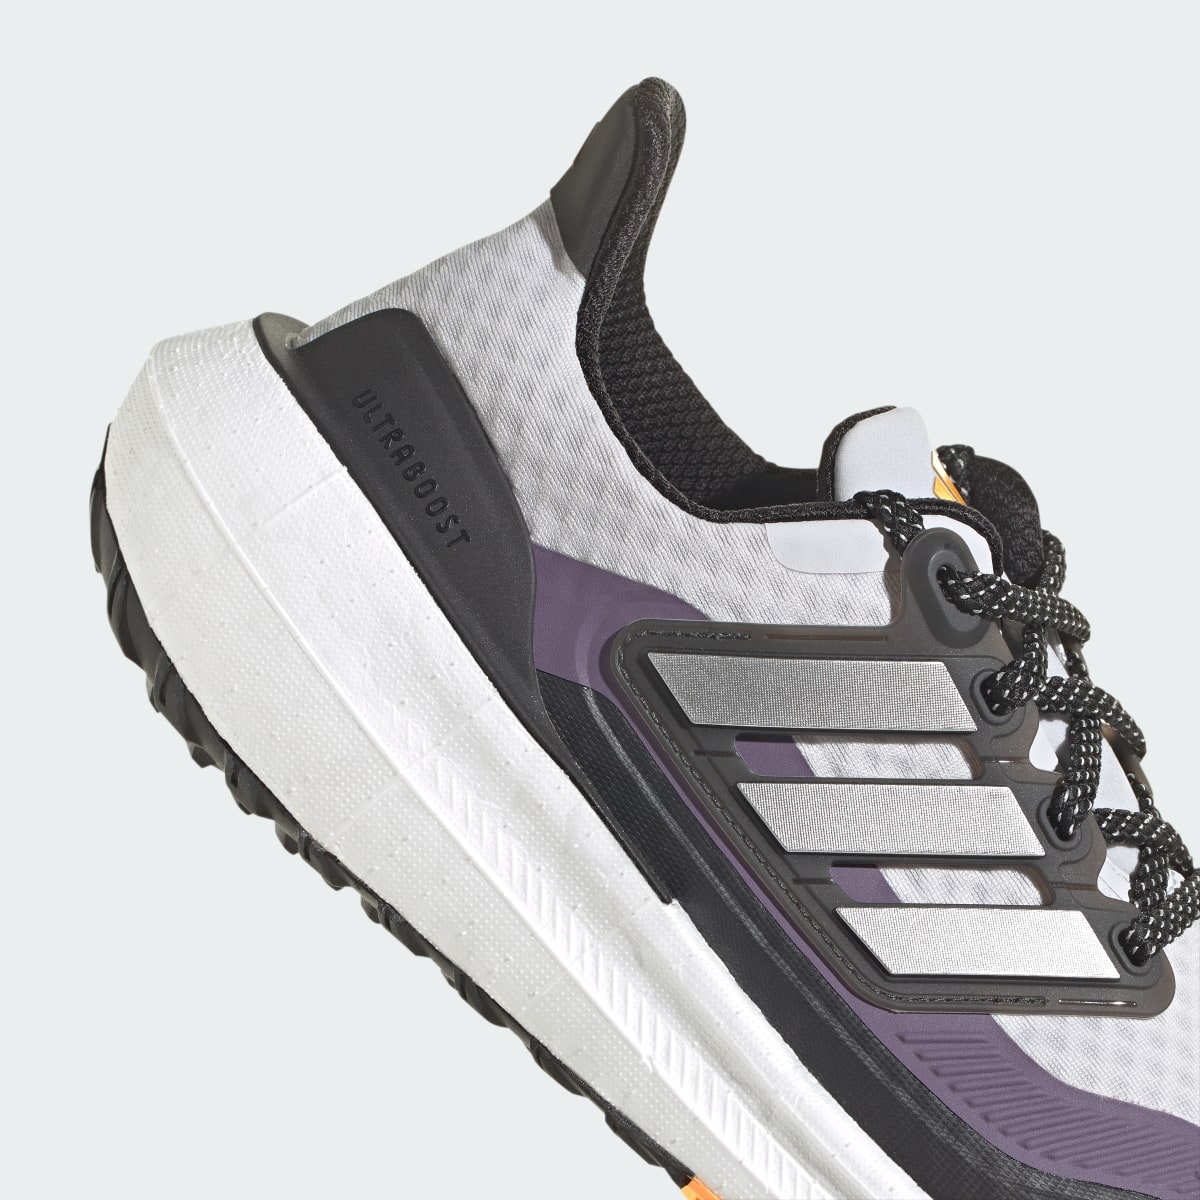 Adidas Ultraboost Light COLD.RDY 2.0 Shoes. 10